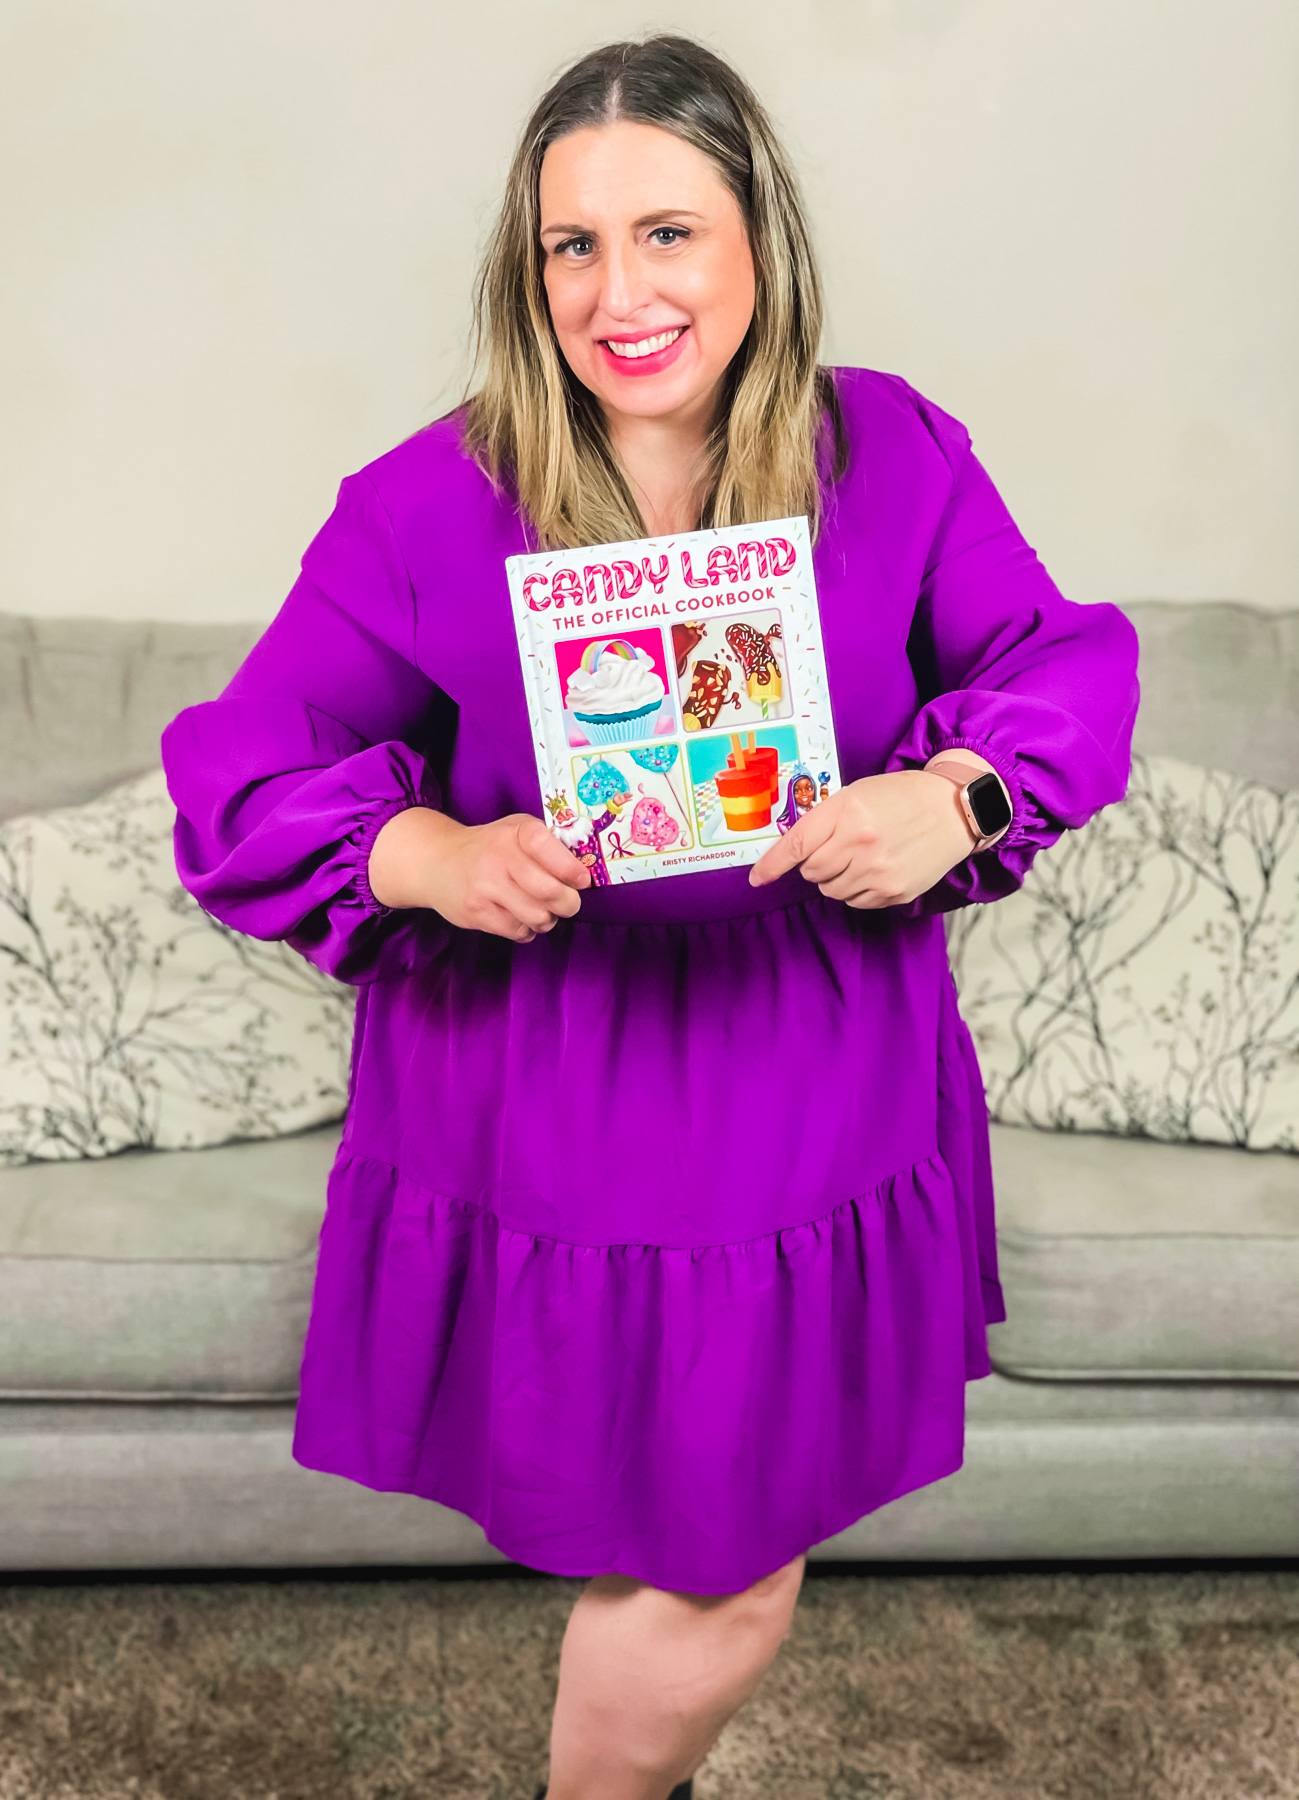 Kristy Richardson holding the new official Candy Land cookbook.